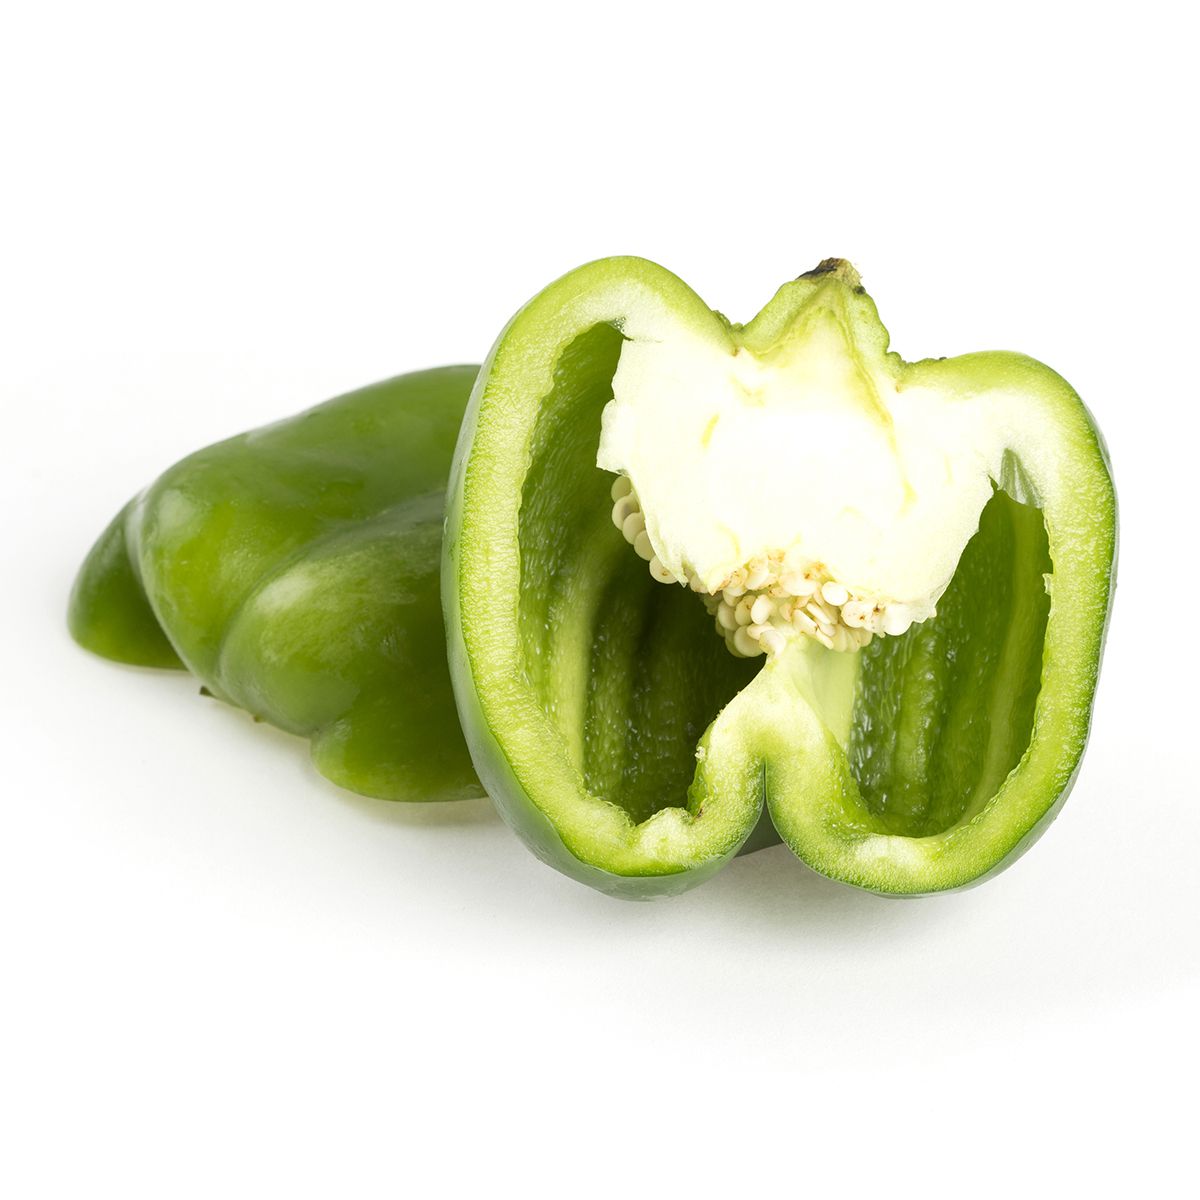 BoxNCase Green Peppers 5 lb